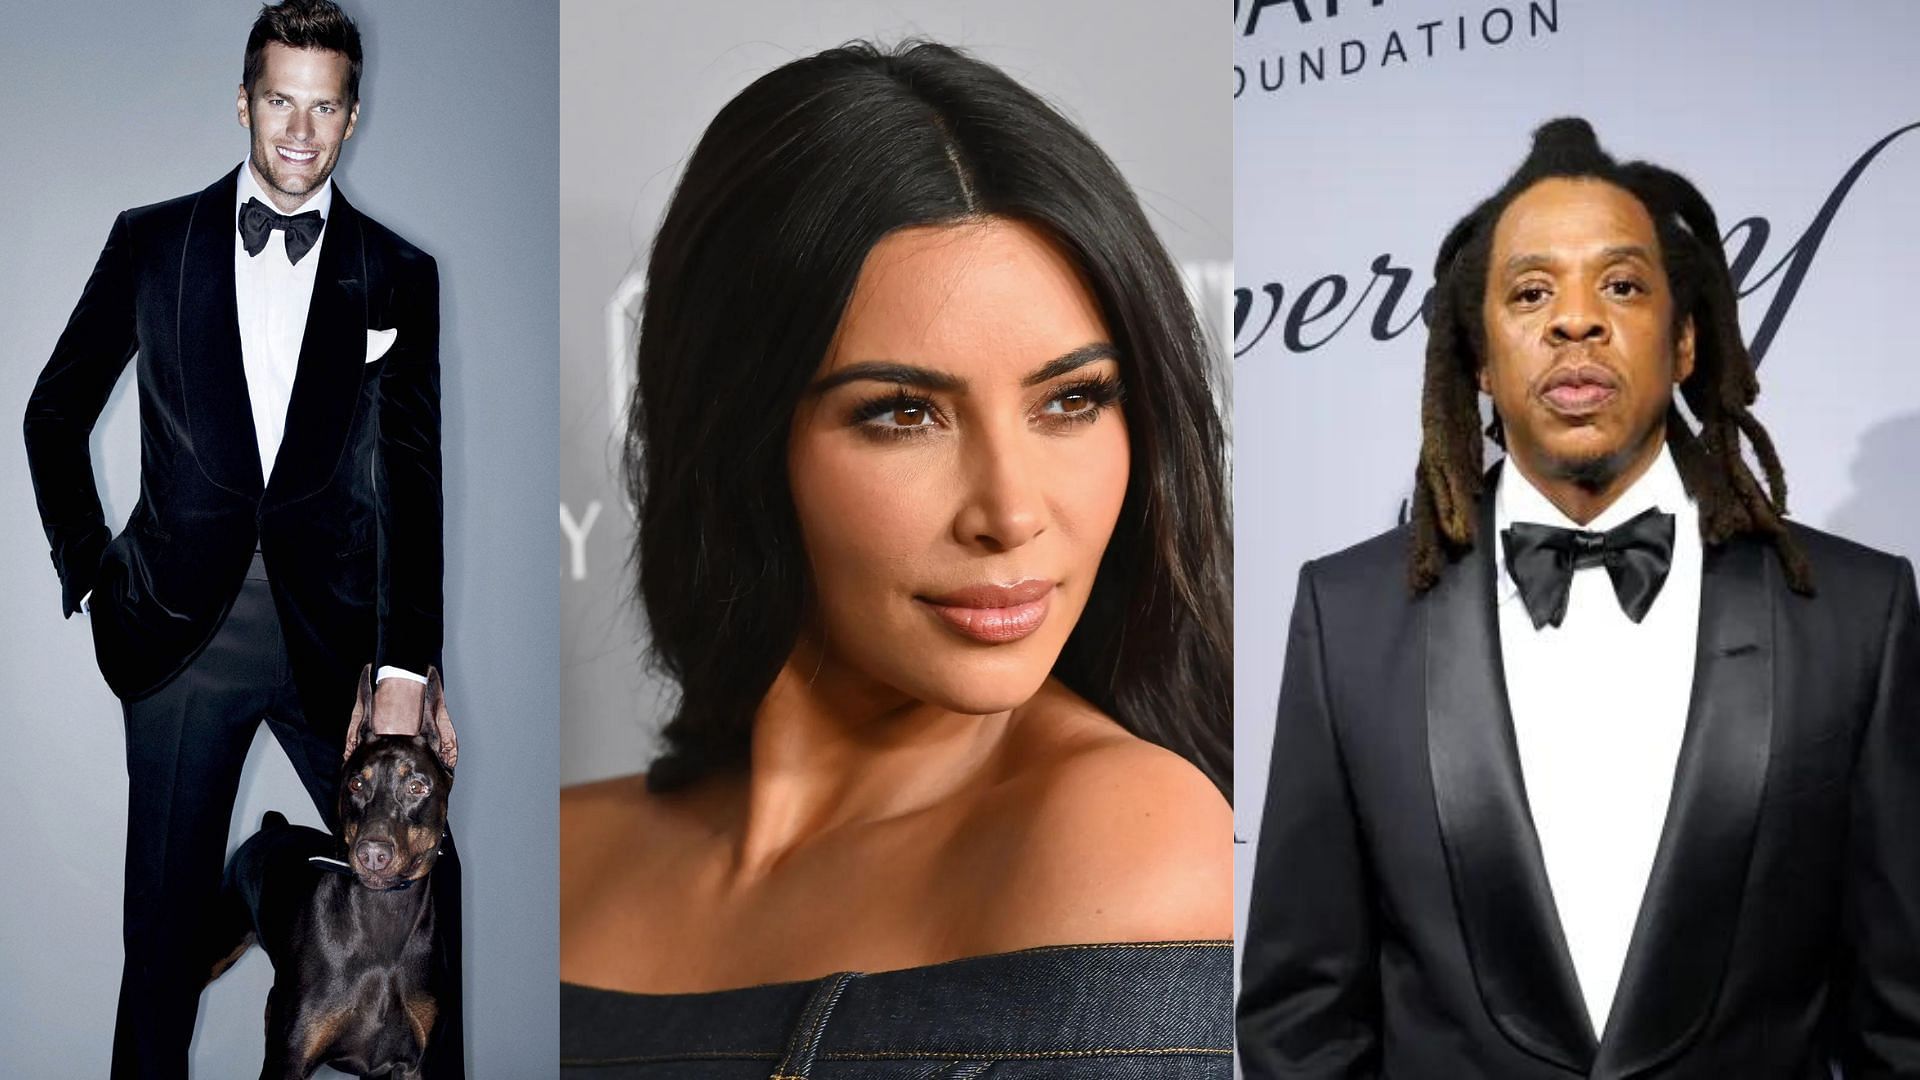  Tom Brady (l),Kim Kardashian (c) and Jay Z (r) appeared at the Reform Alliance Charity event